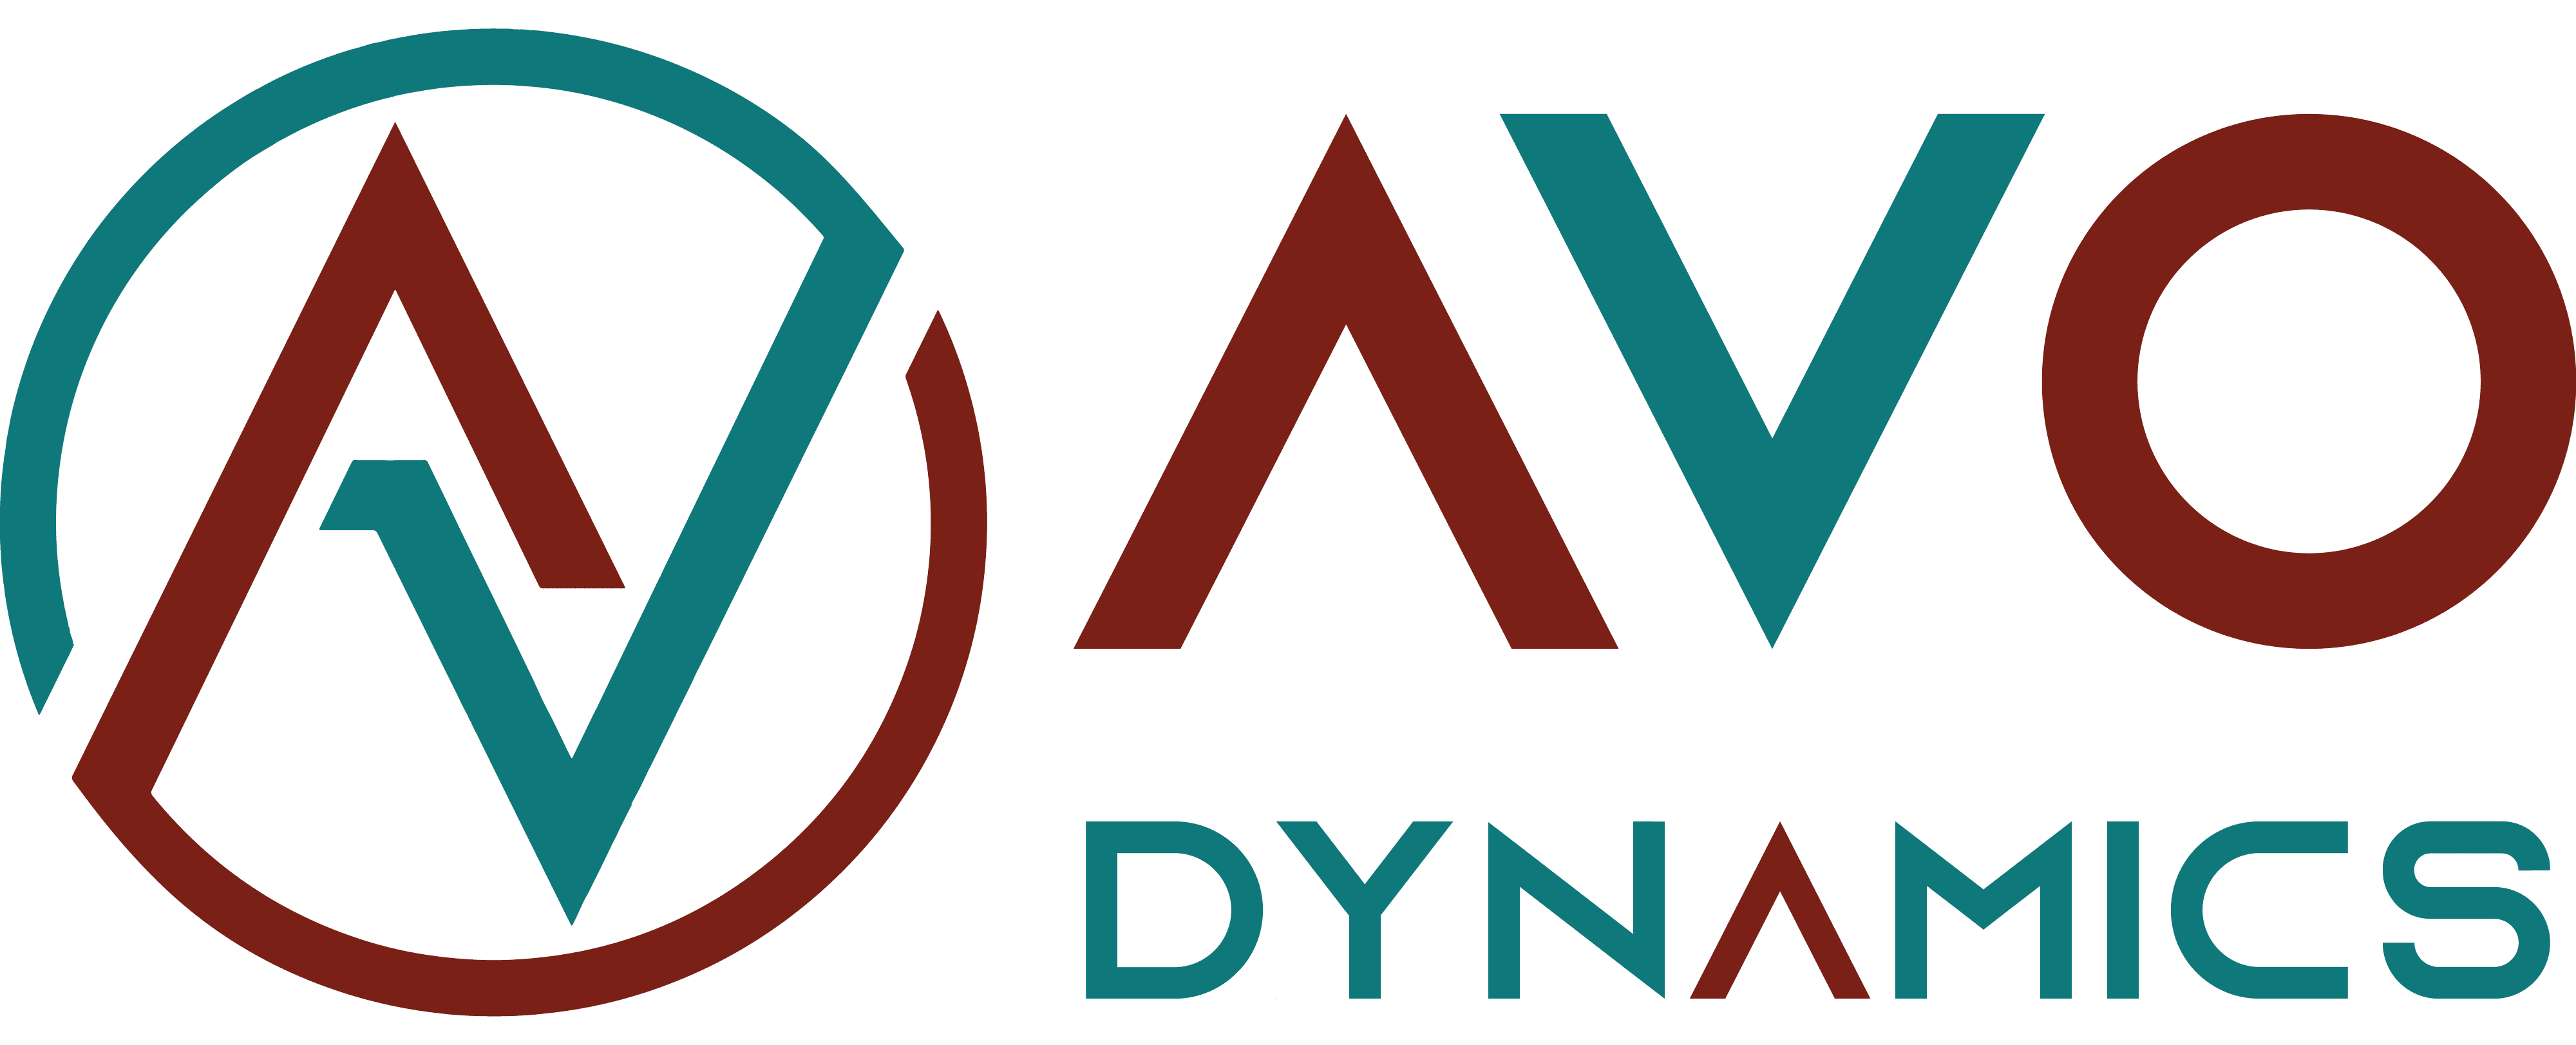 AVO Dynamics, 3. Partners Sponsor of the Continental Kitchen